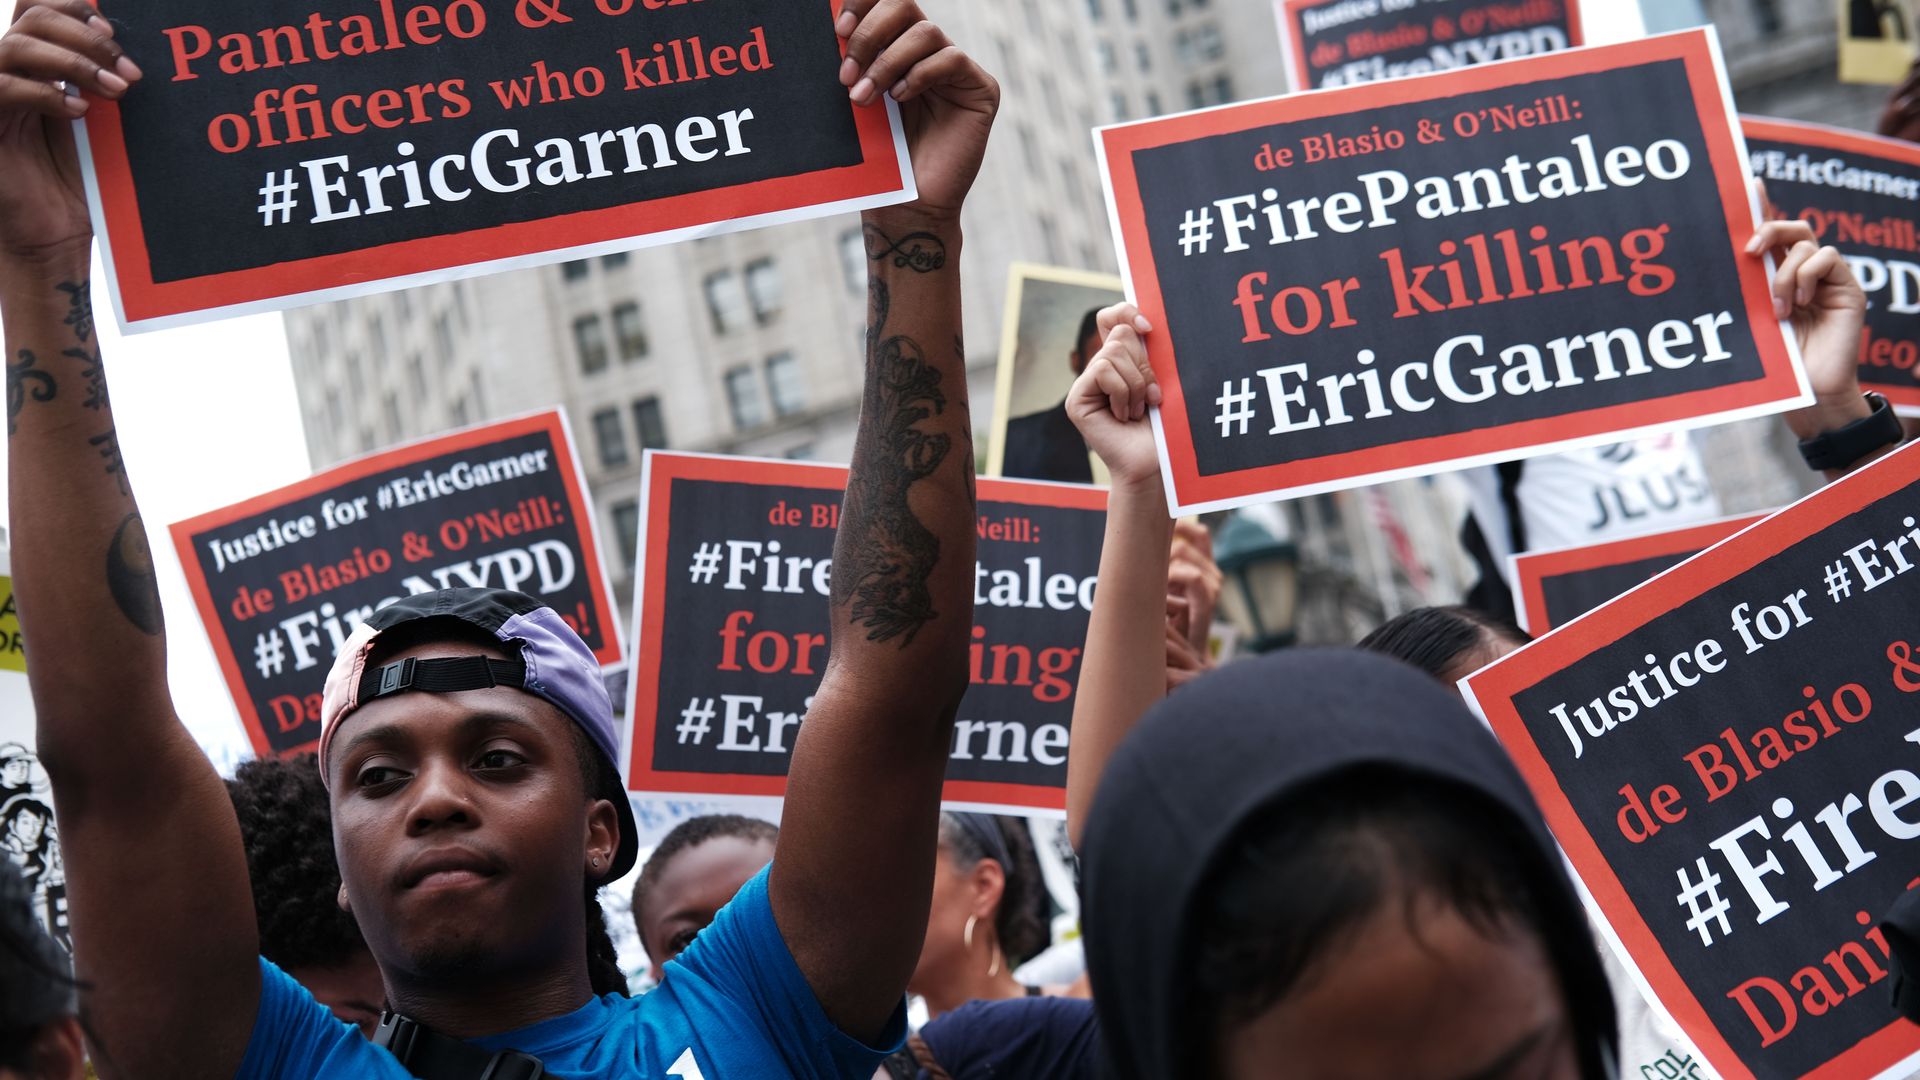 Protestors calling for officer Daniel Pantaleo to be fired for the death of Eric Garner in 2014